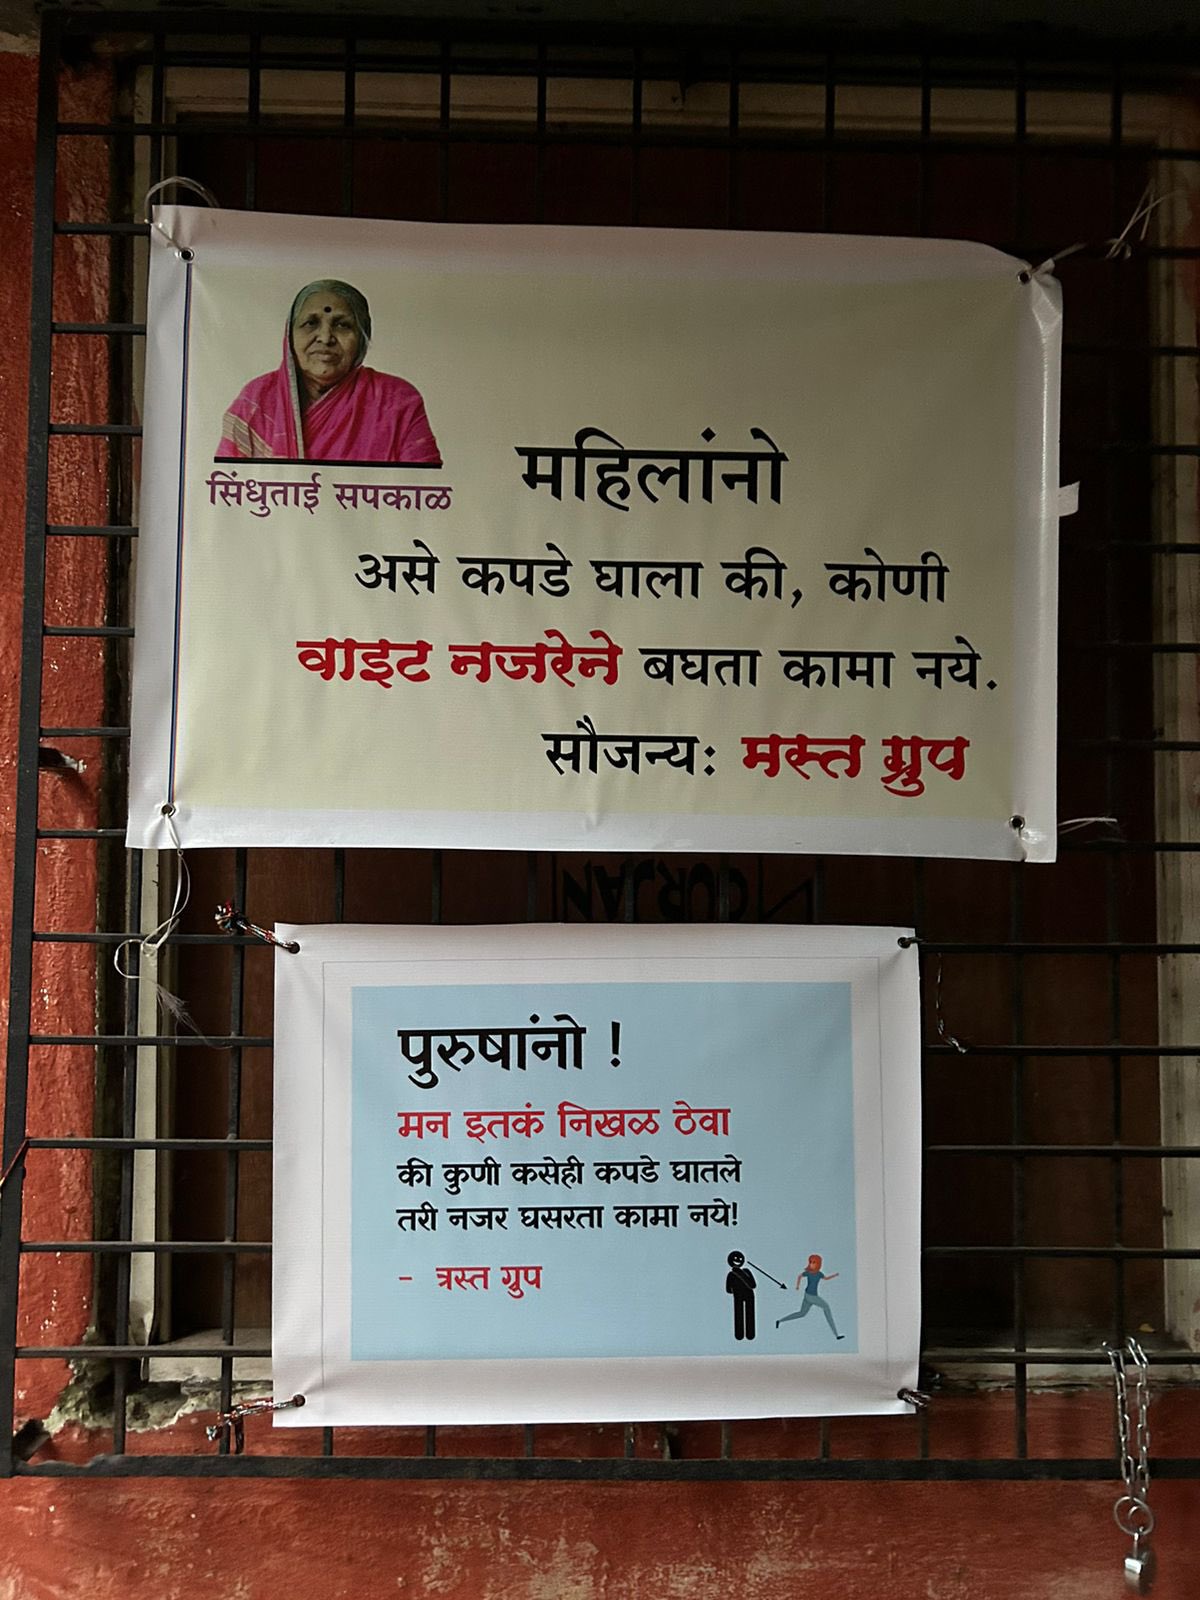 Poster In Pune Advocating Modest Dress For Women Faces Backlash